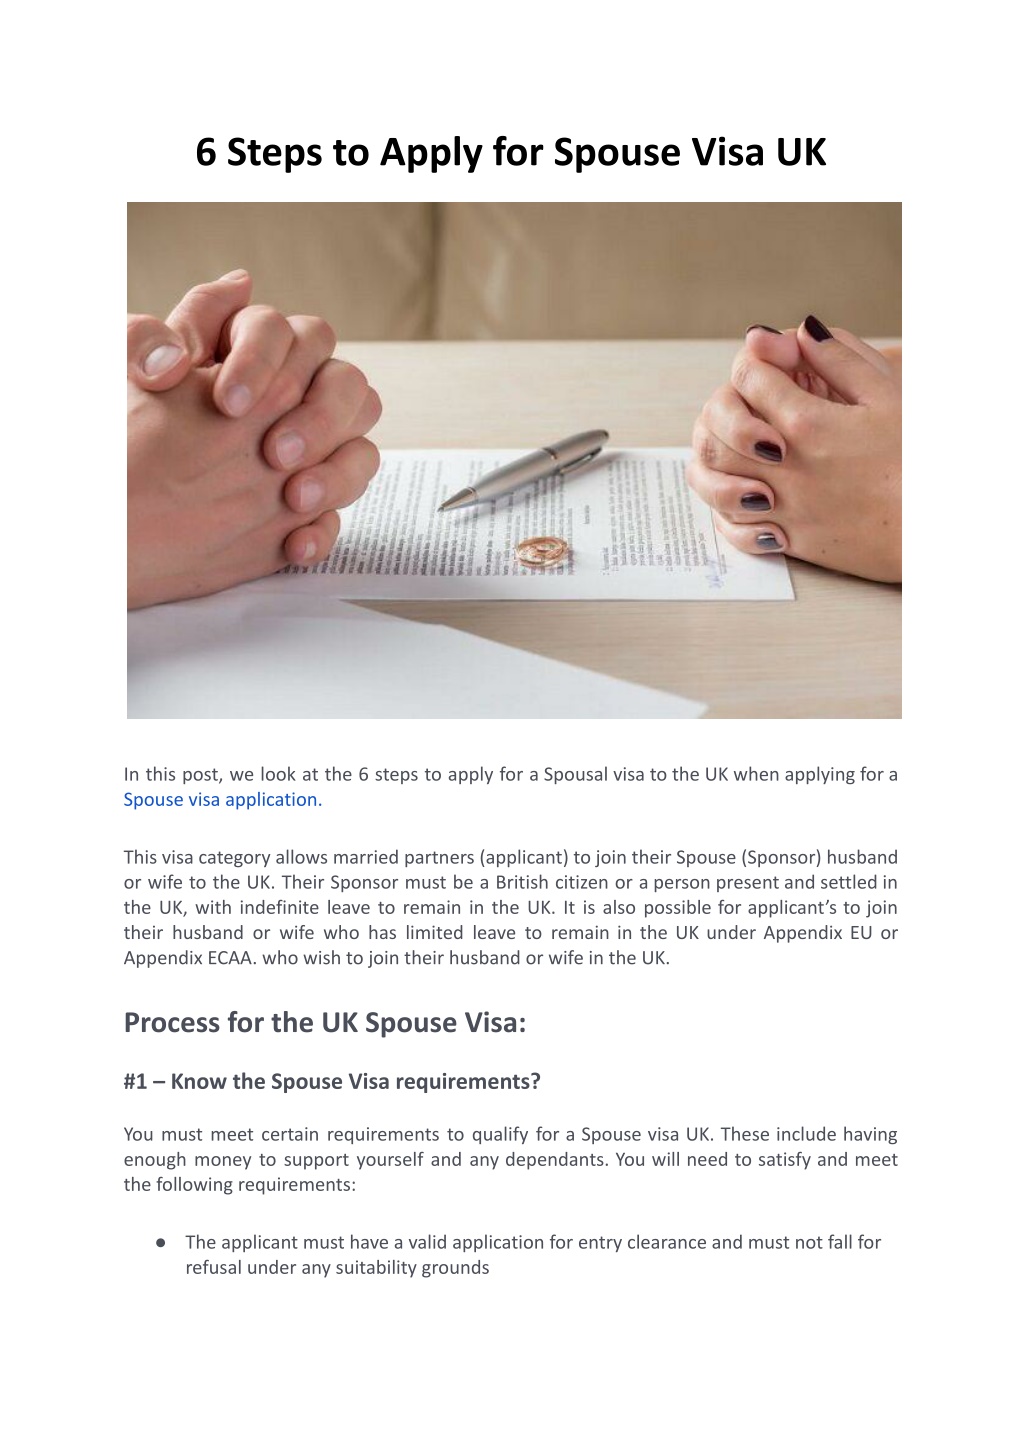 personal statement for spouse visa uk